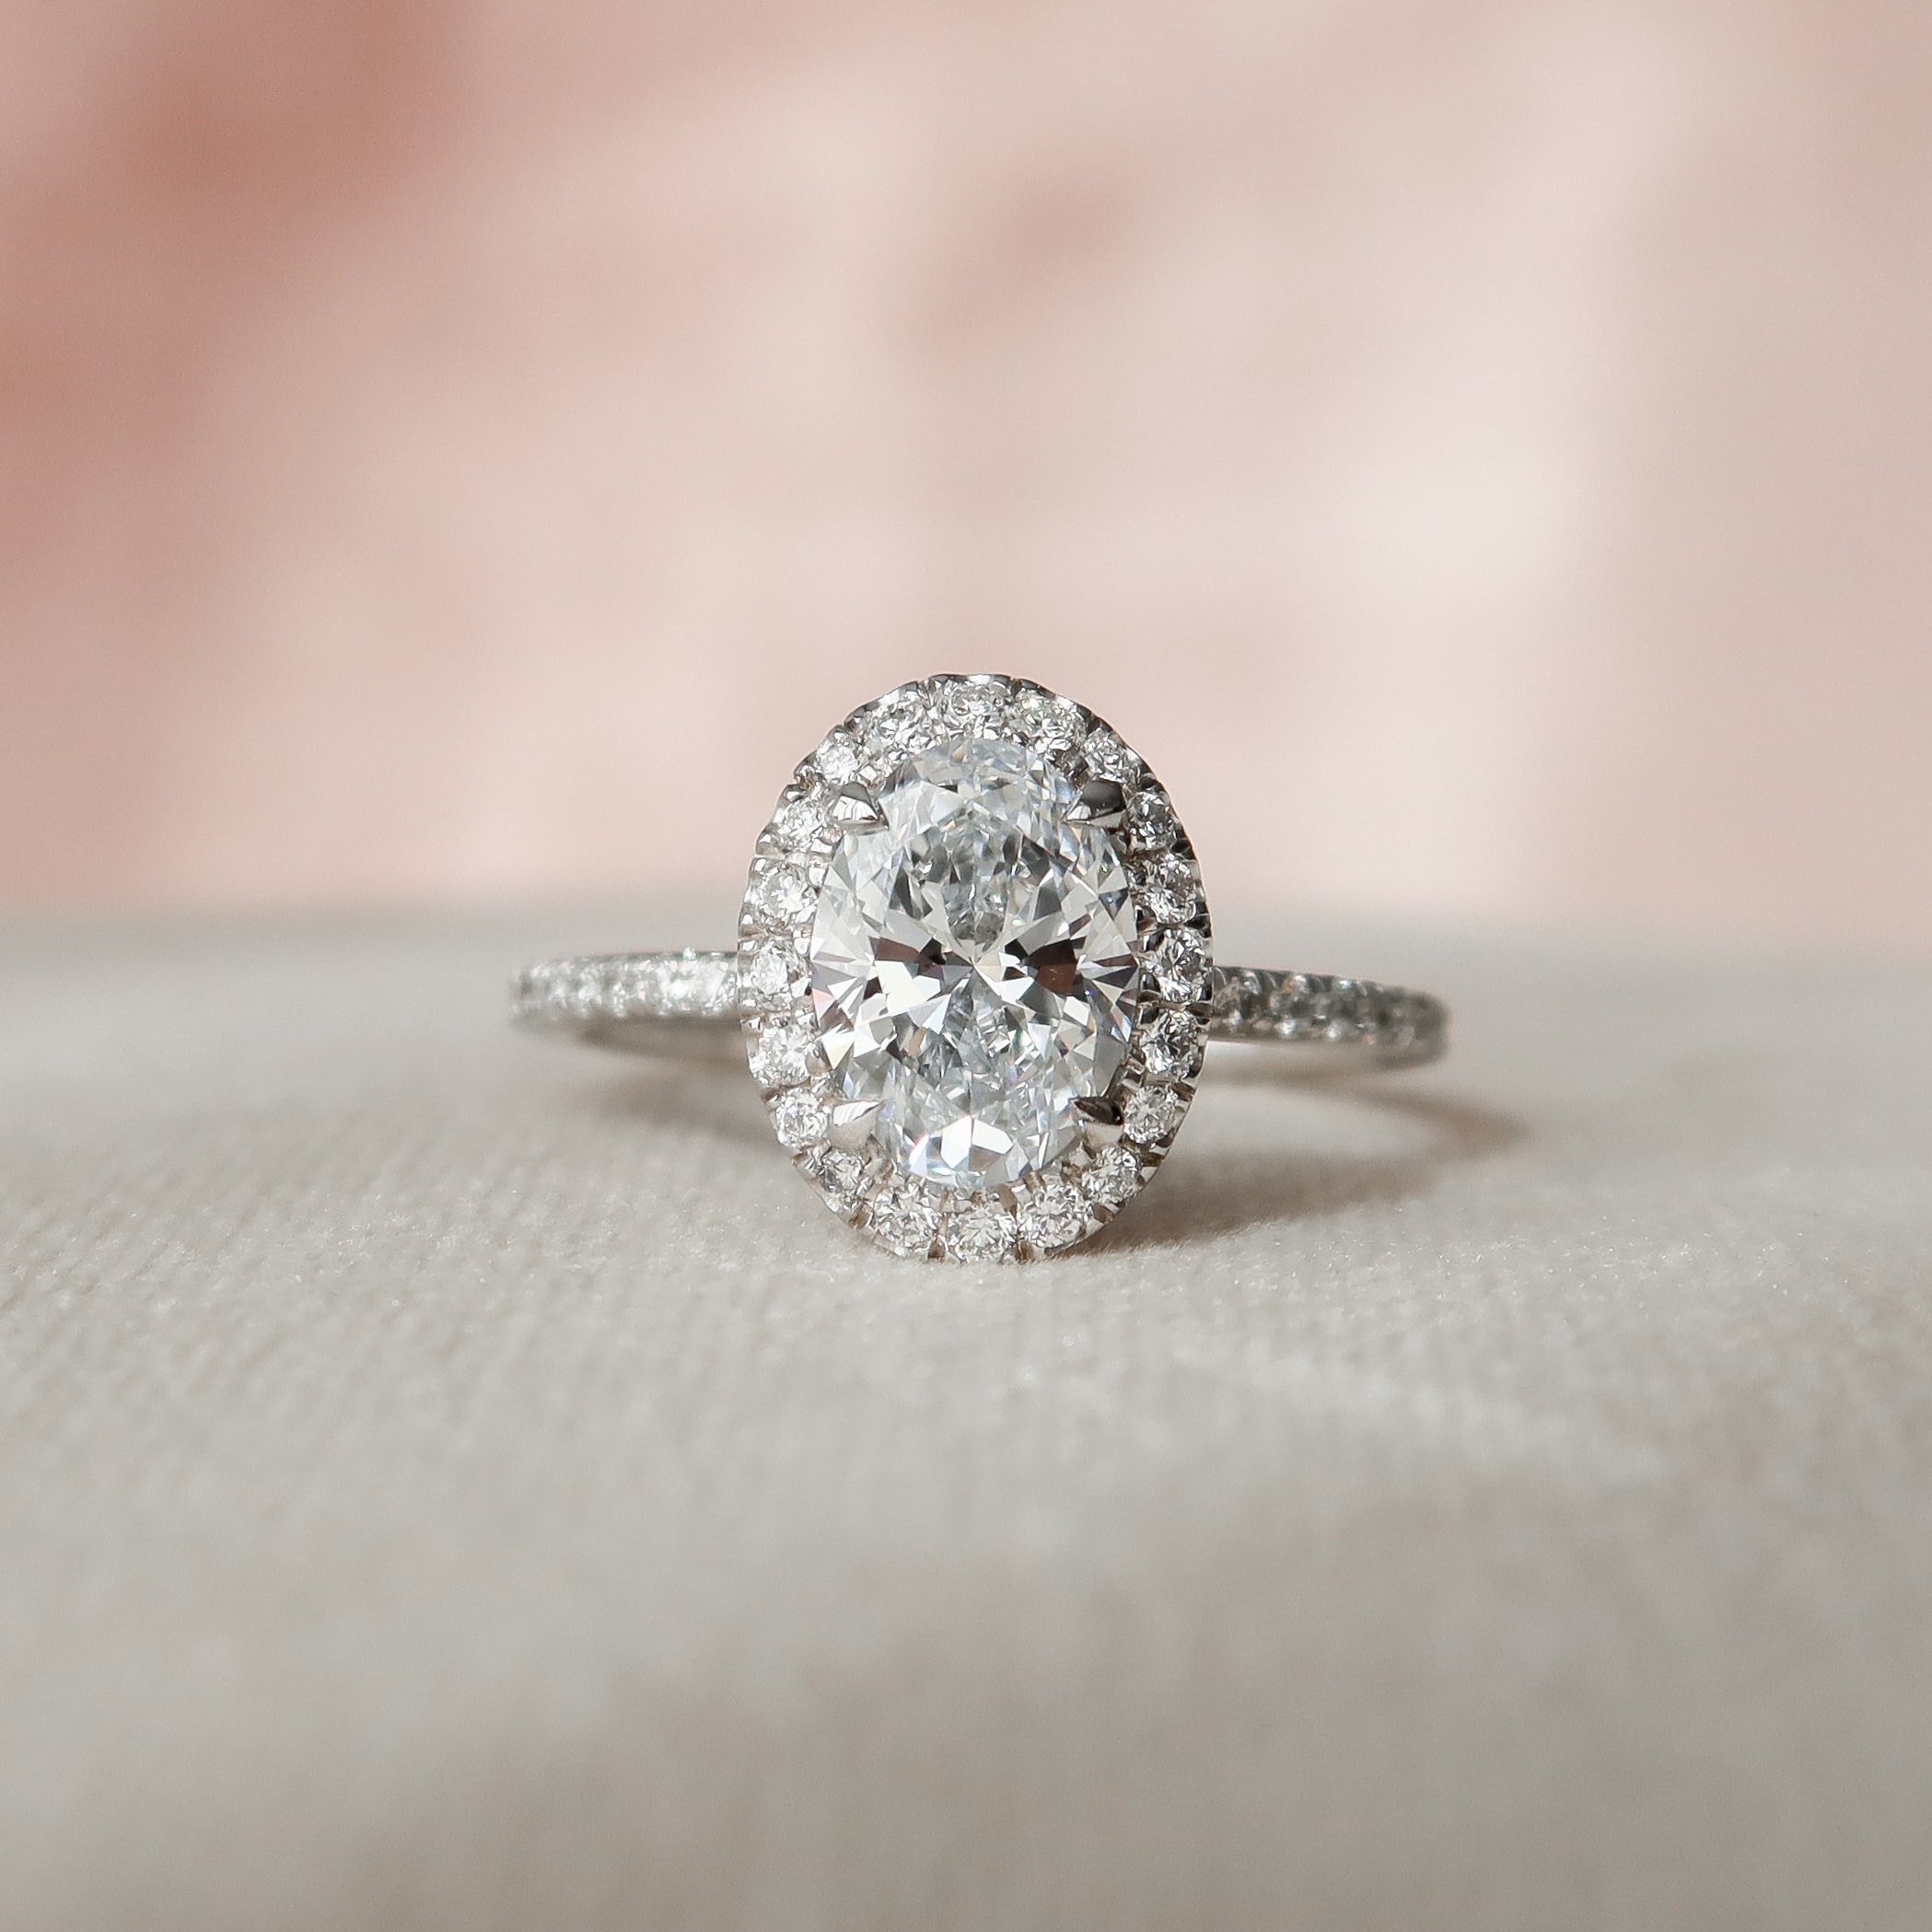 5 Reasons Not to Buy an Oval Engagement Ring